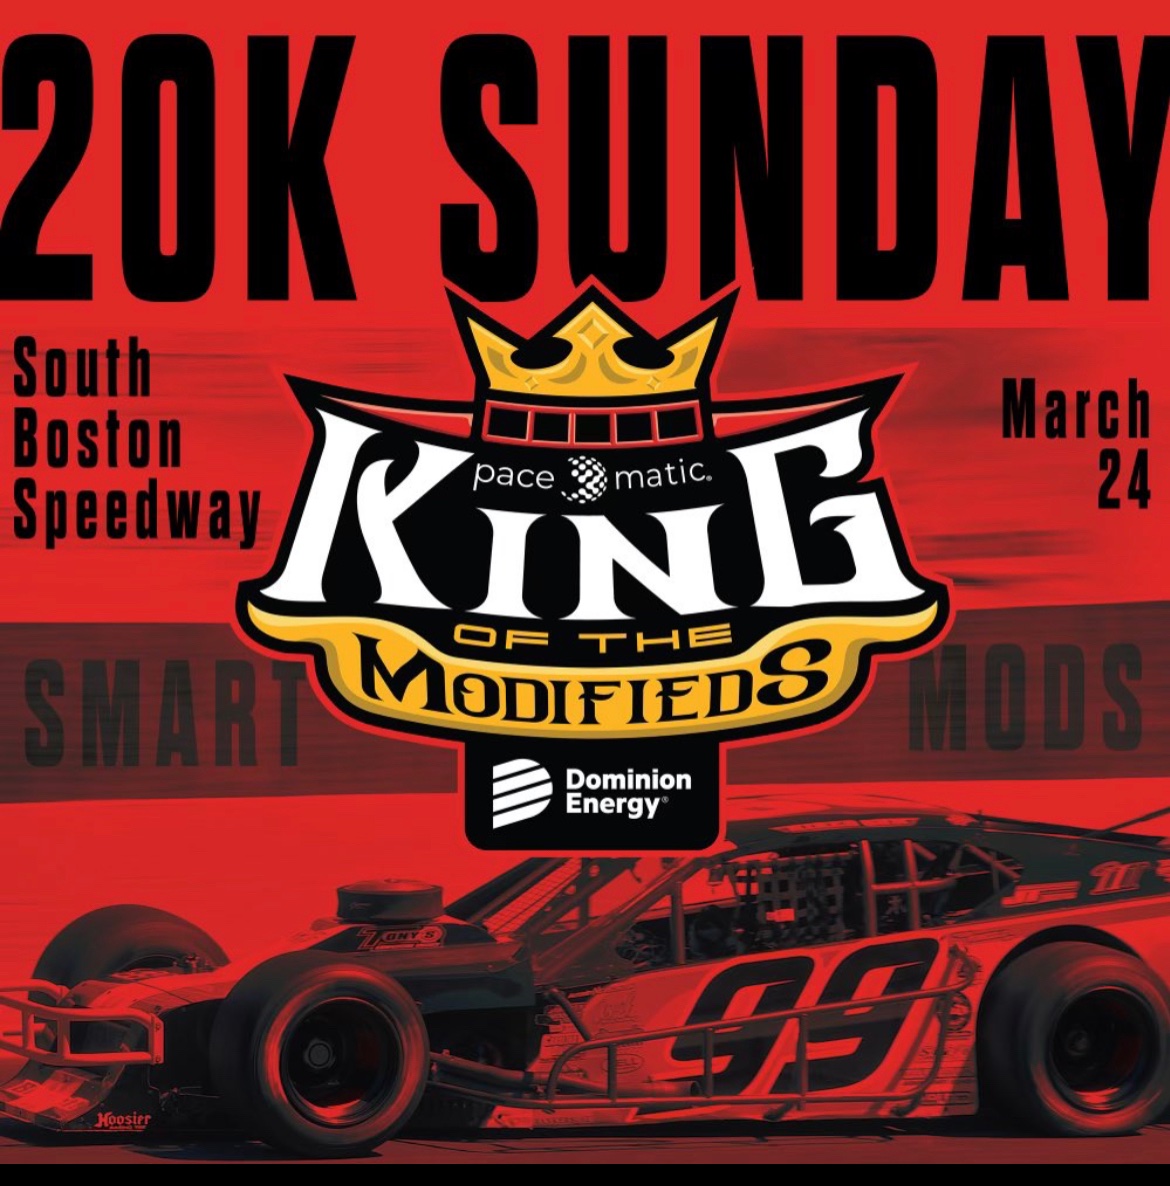 Today. South Boston Speedway. King of the Modifieds. $100,000 purse. Ya gotta go see this!